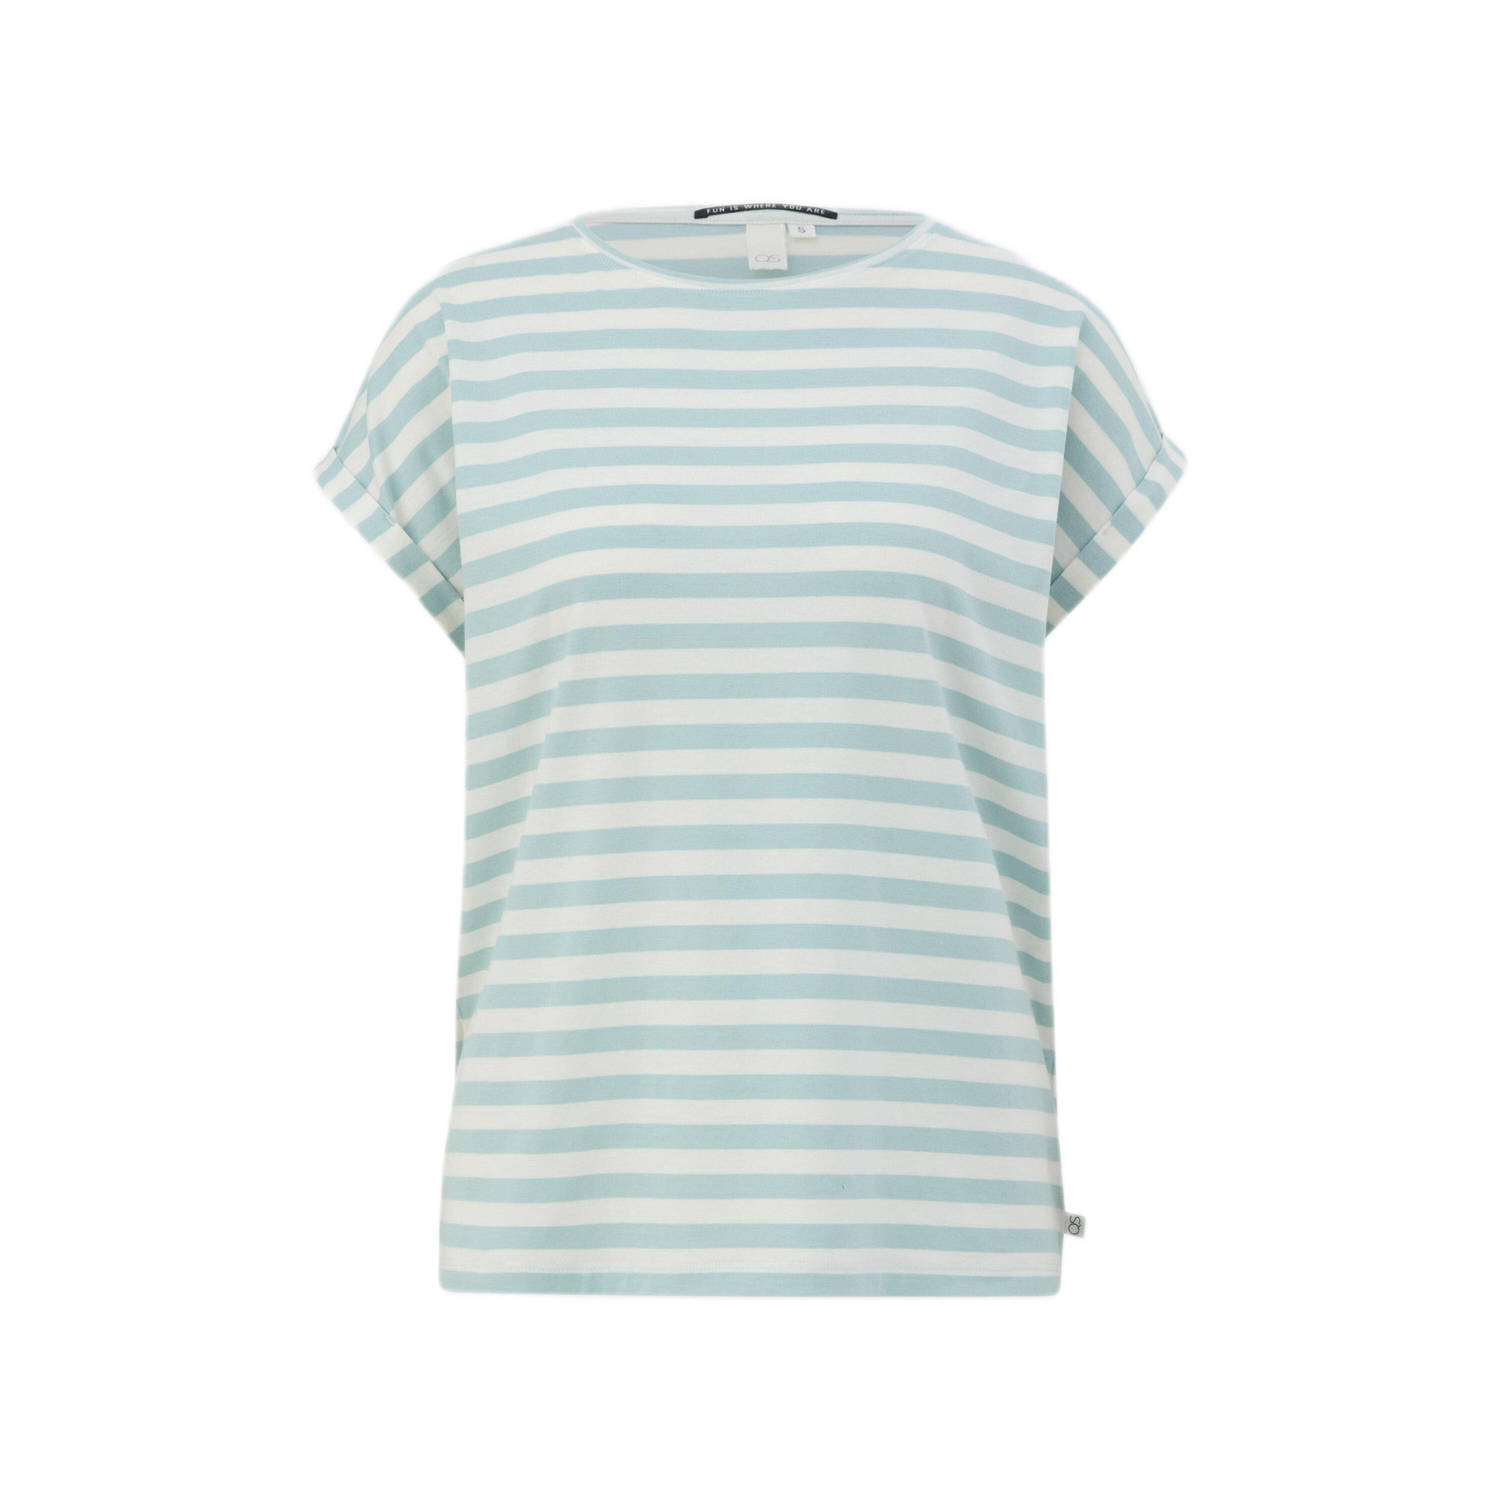 Q S by s.Oliver gestreepte top turquoise wit